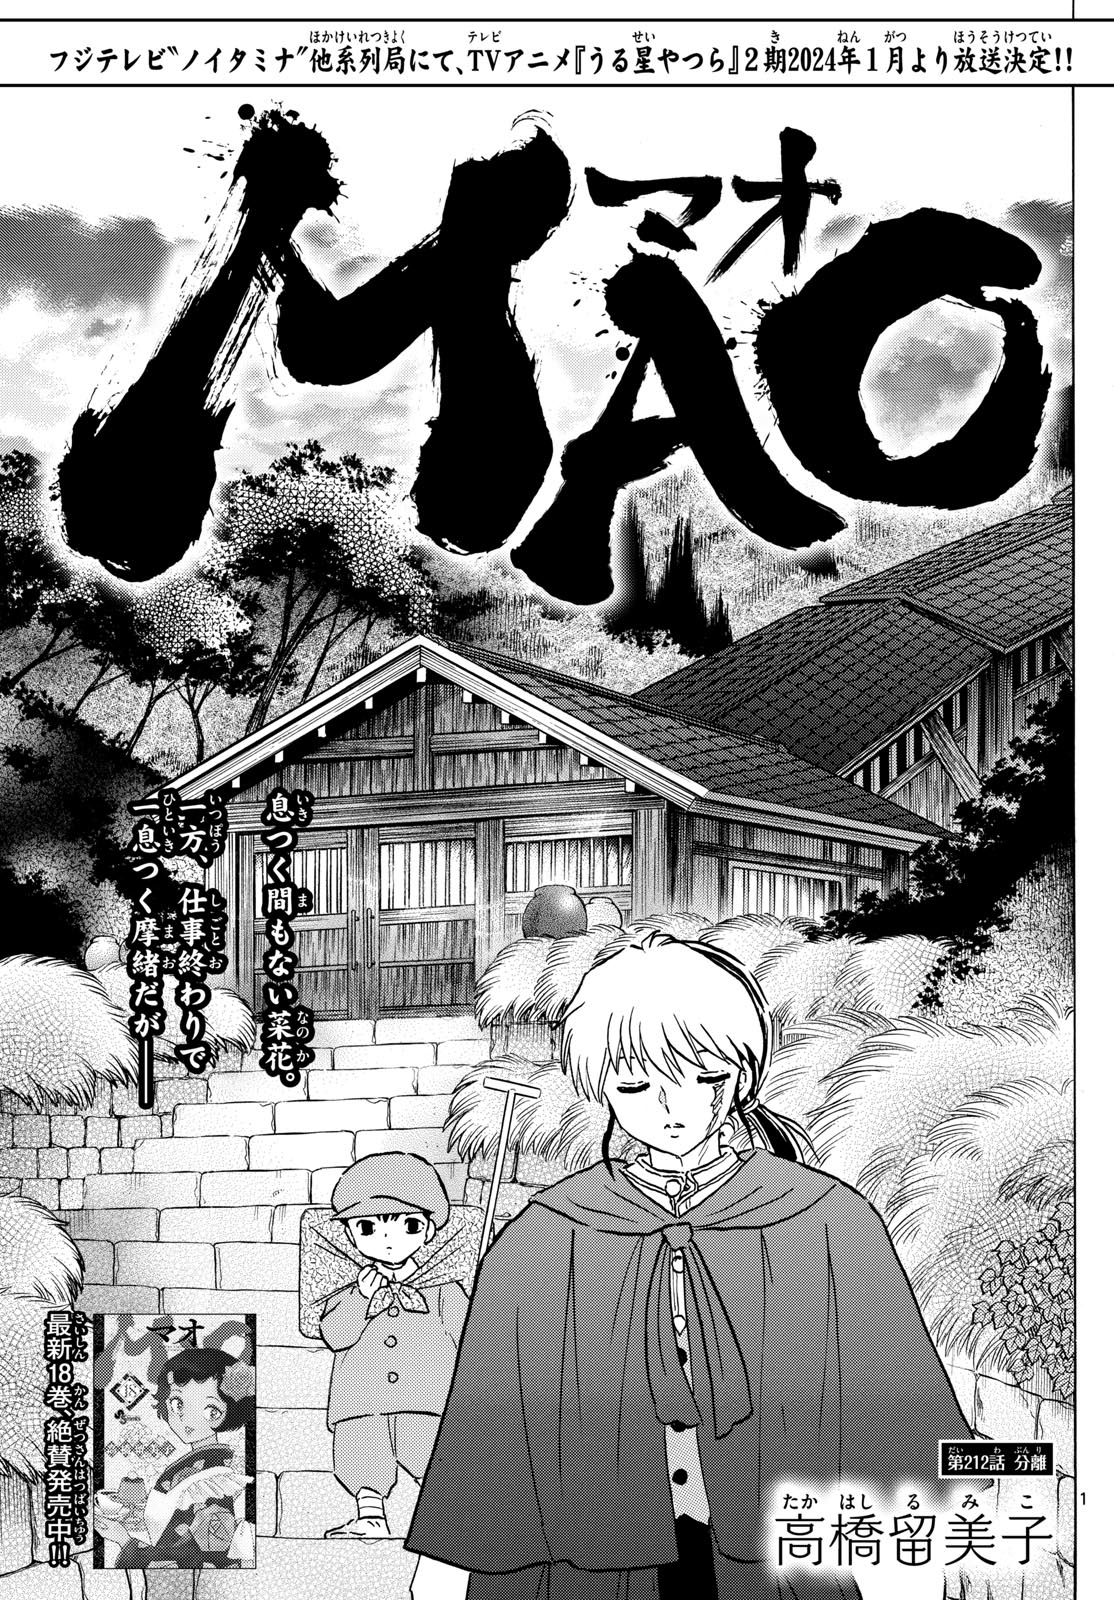 MAO - Chapter 212 - Page 1